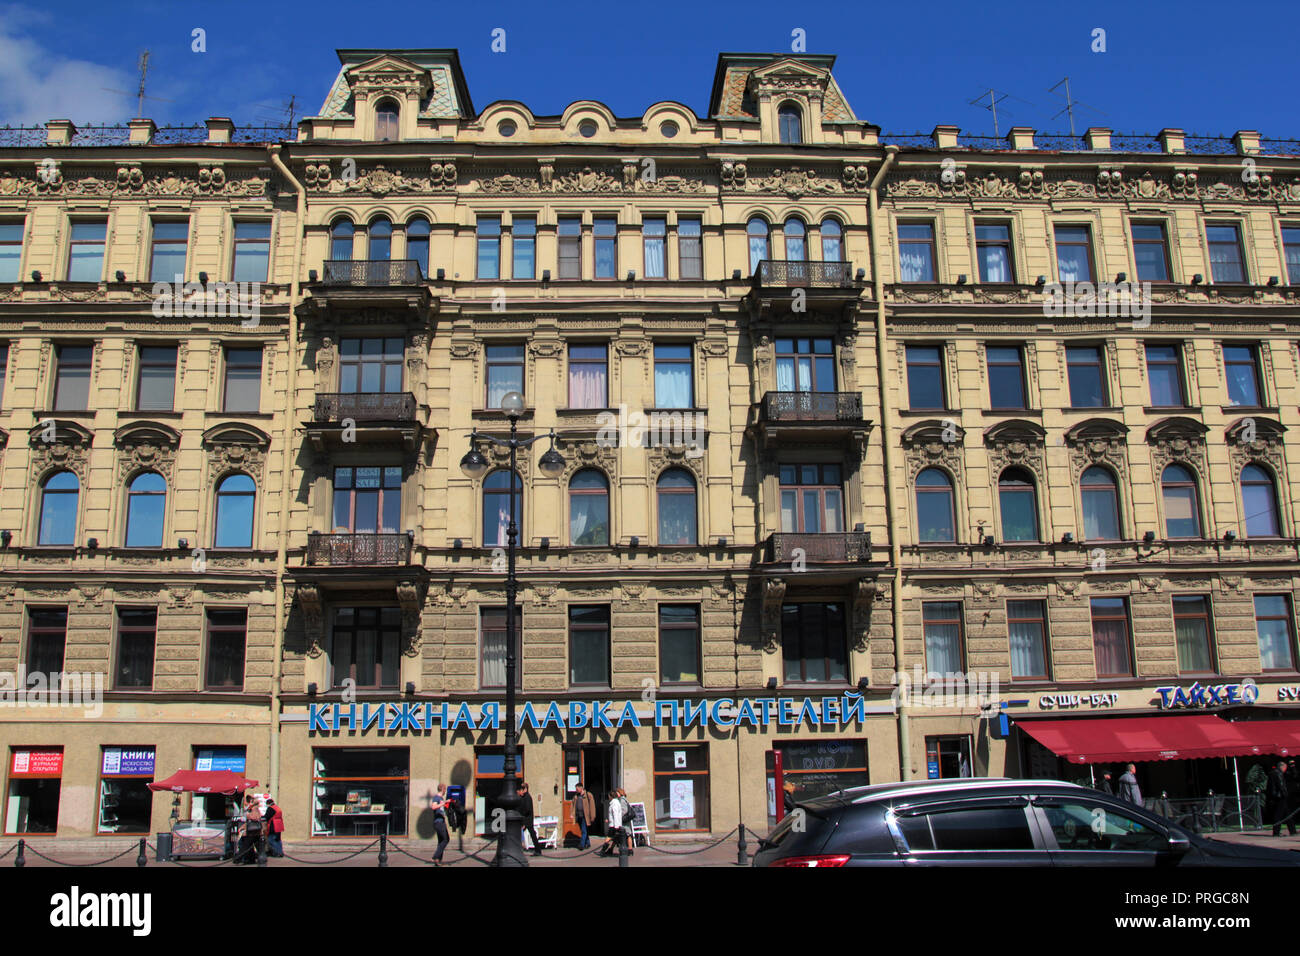 The grand façade of one of the many buildings on Nevsky Prospekt which is the main thoroughfare in St Petersburg, Russia. Stock Photo